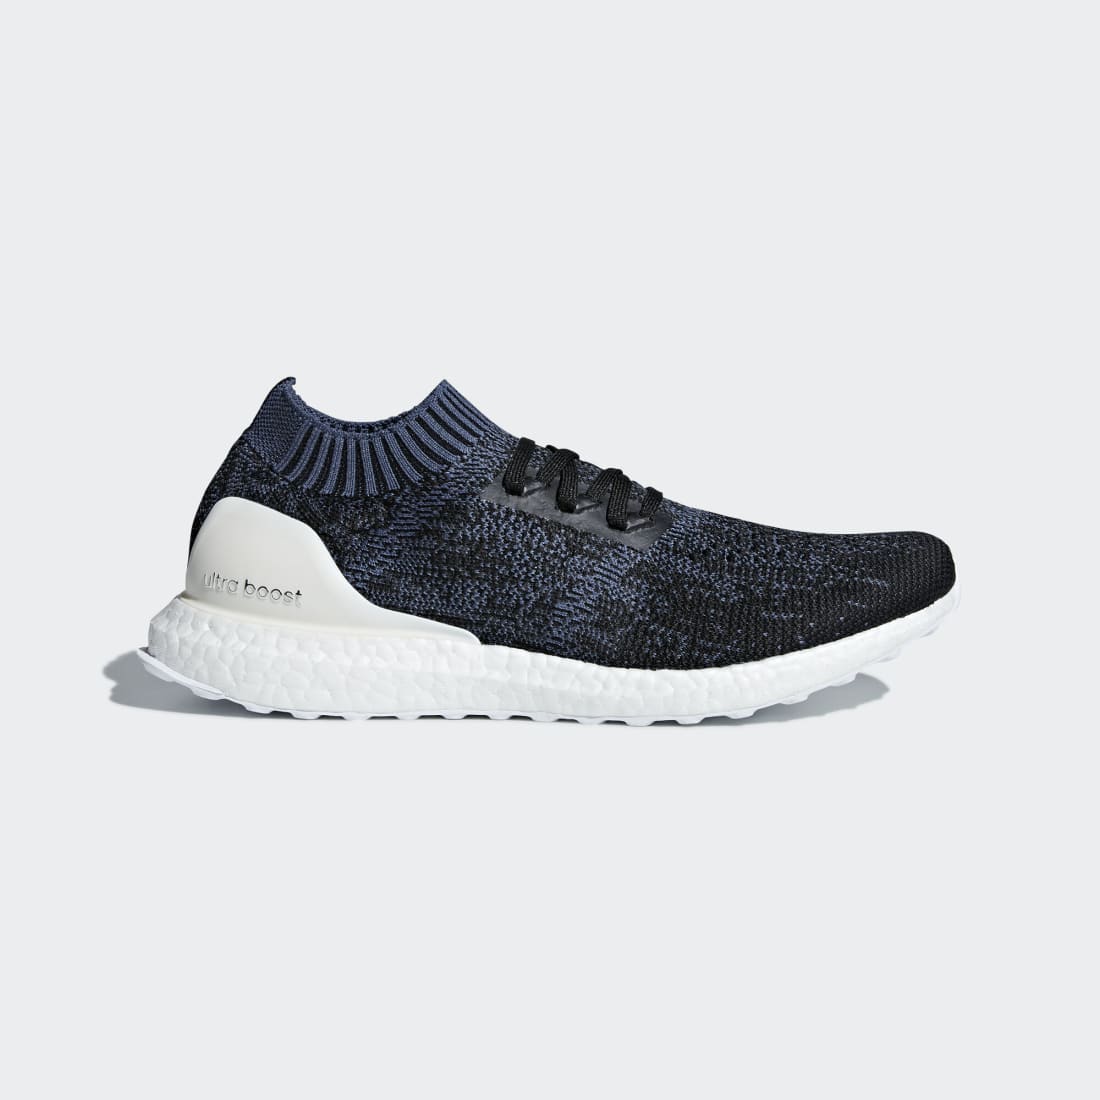 adidas Ultra Boost Uncaged Tech Ink